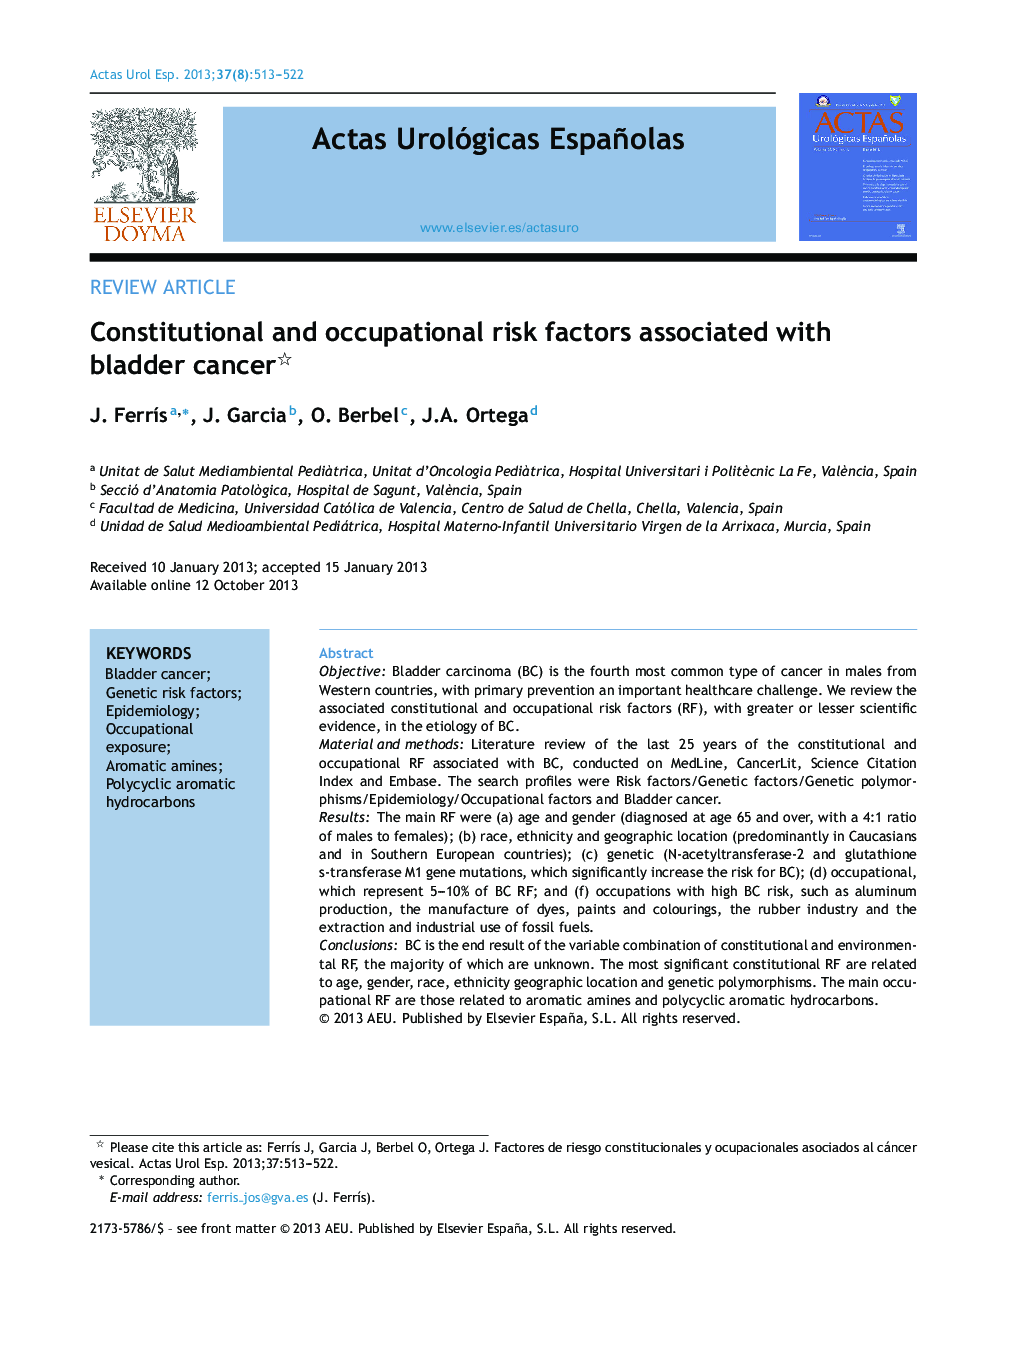 Constitutional and occupational risk factors associated with bladder cancer 